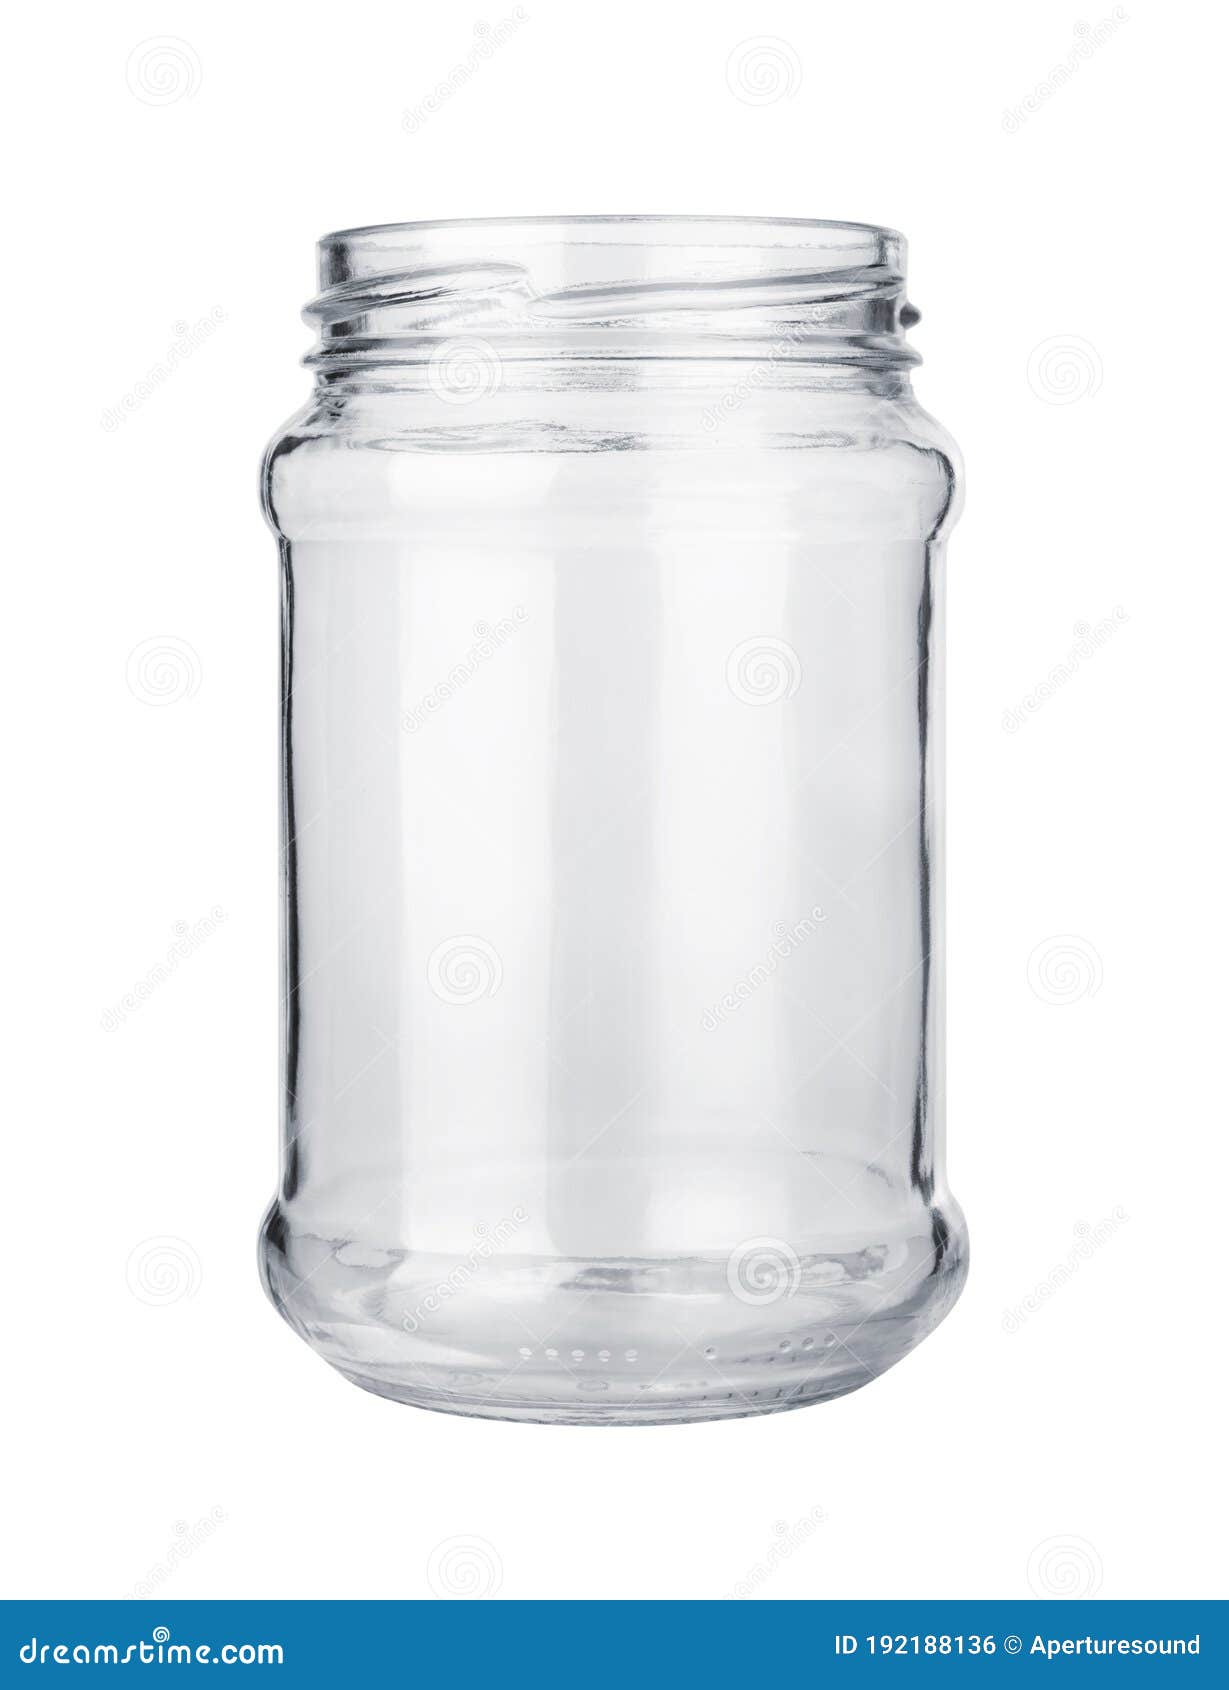 https://thumbs.dreamstime.com/z/empty-glass-jar-isolated-white-background-192188136.jpg